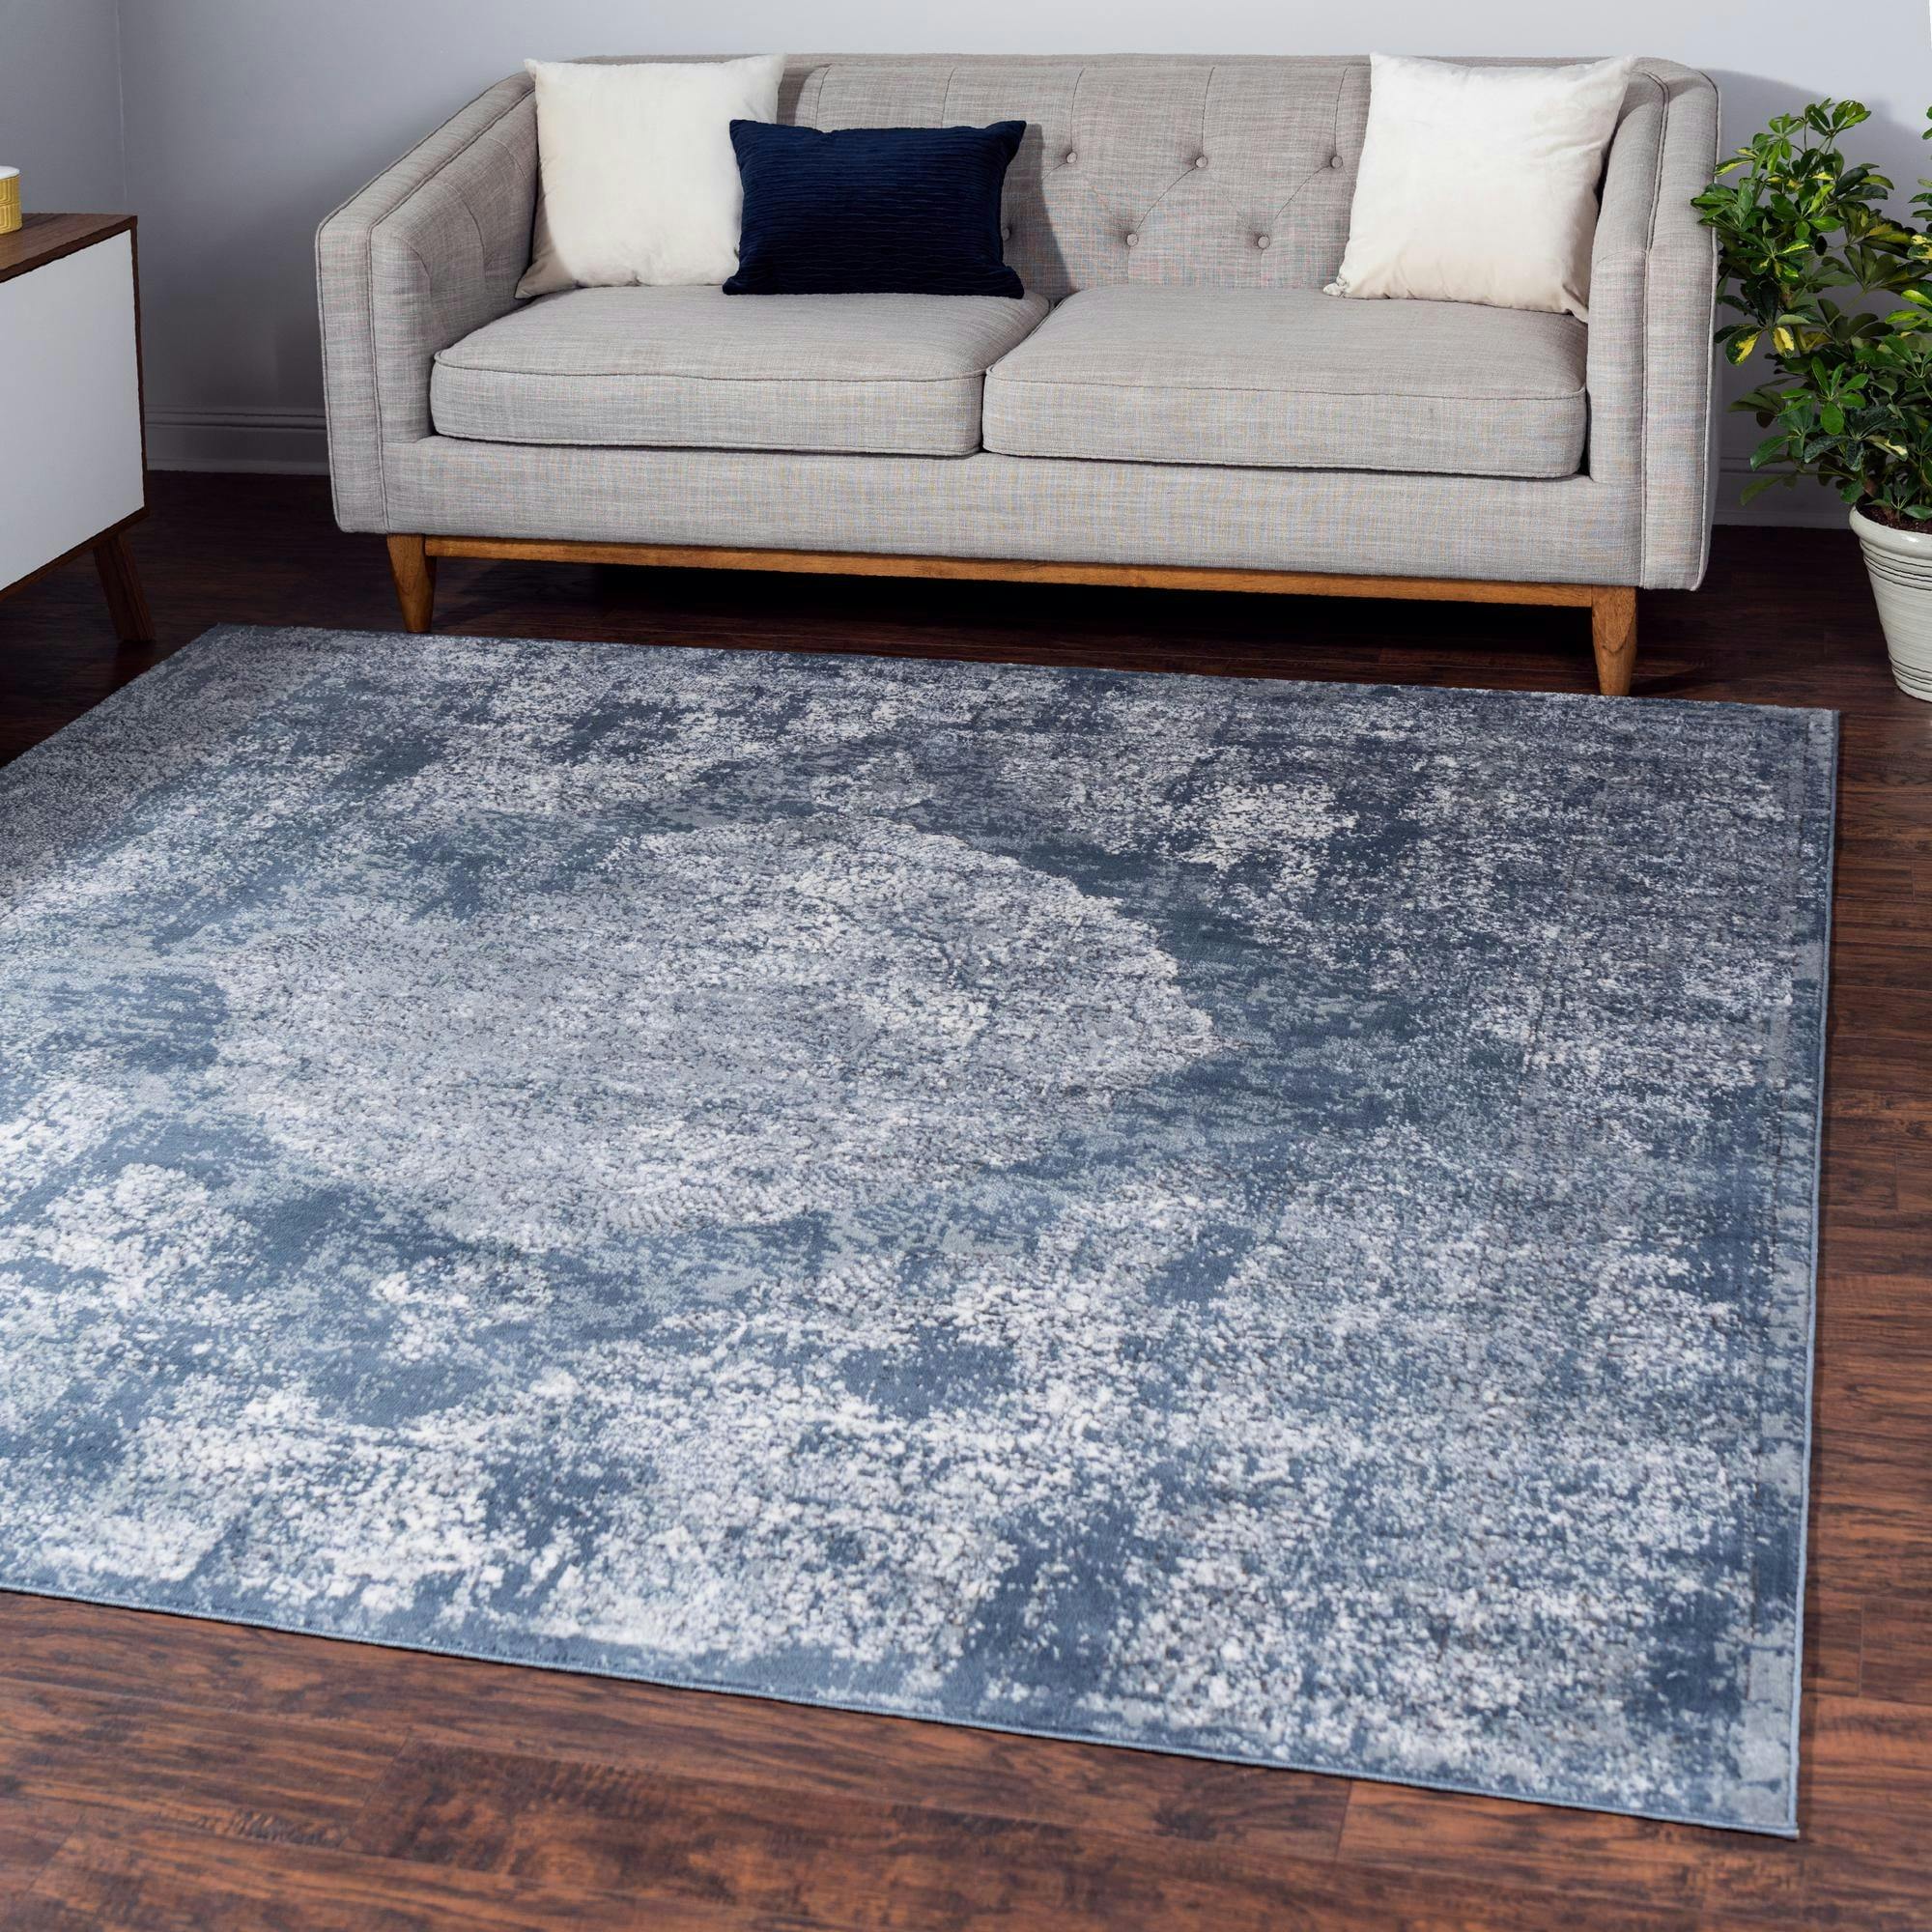 Soothing Blue Geometric 4' Square Synthetic Rug